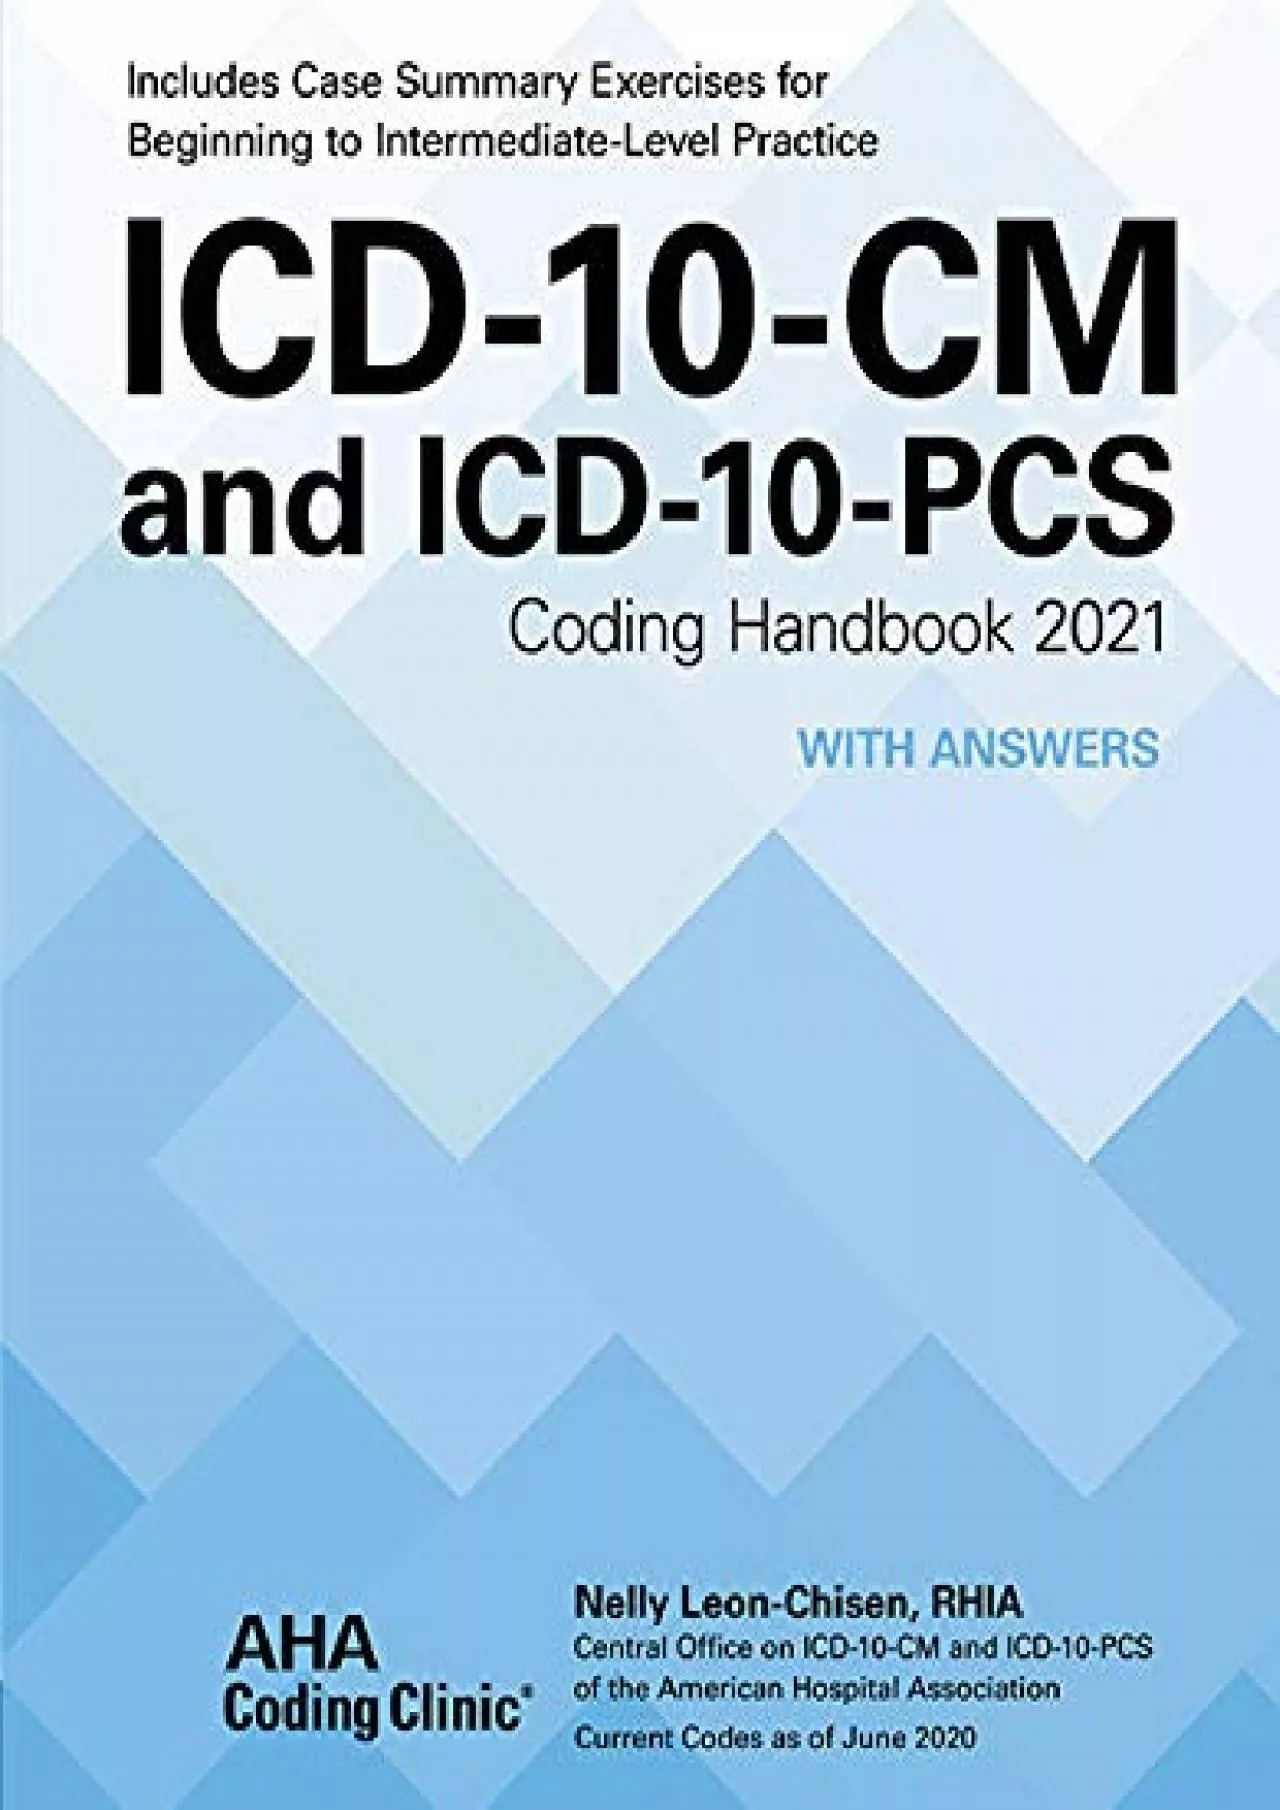 (DOWNLOAD)-ICD-10-CM and ICD-10-PCS Coding Handbook with Answers 2021